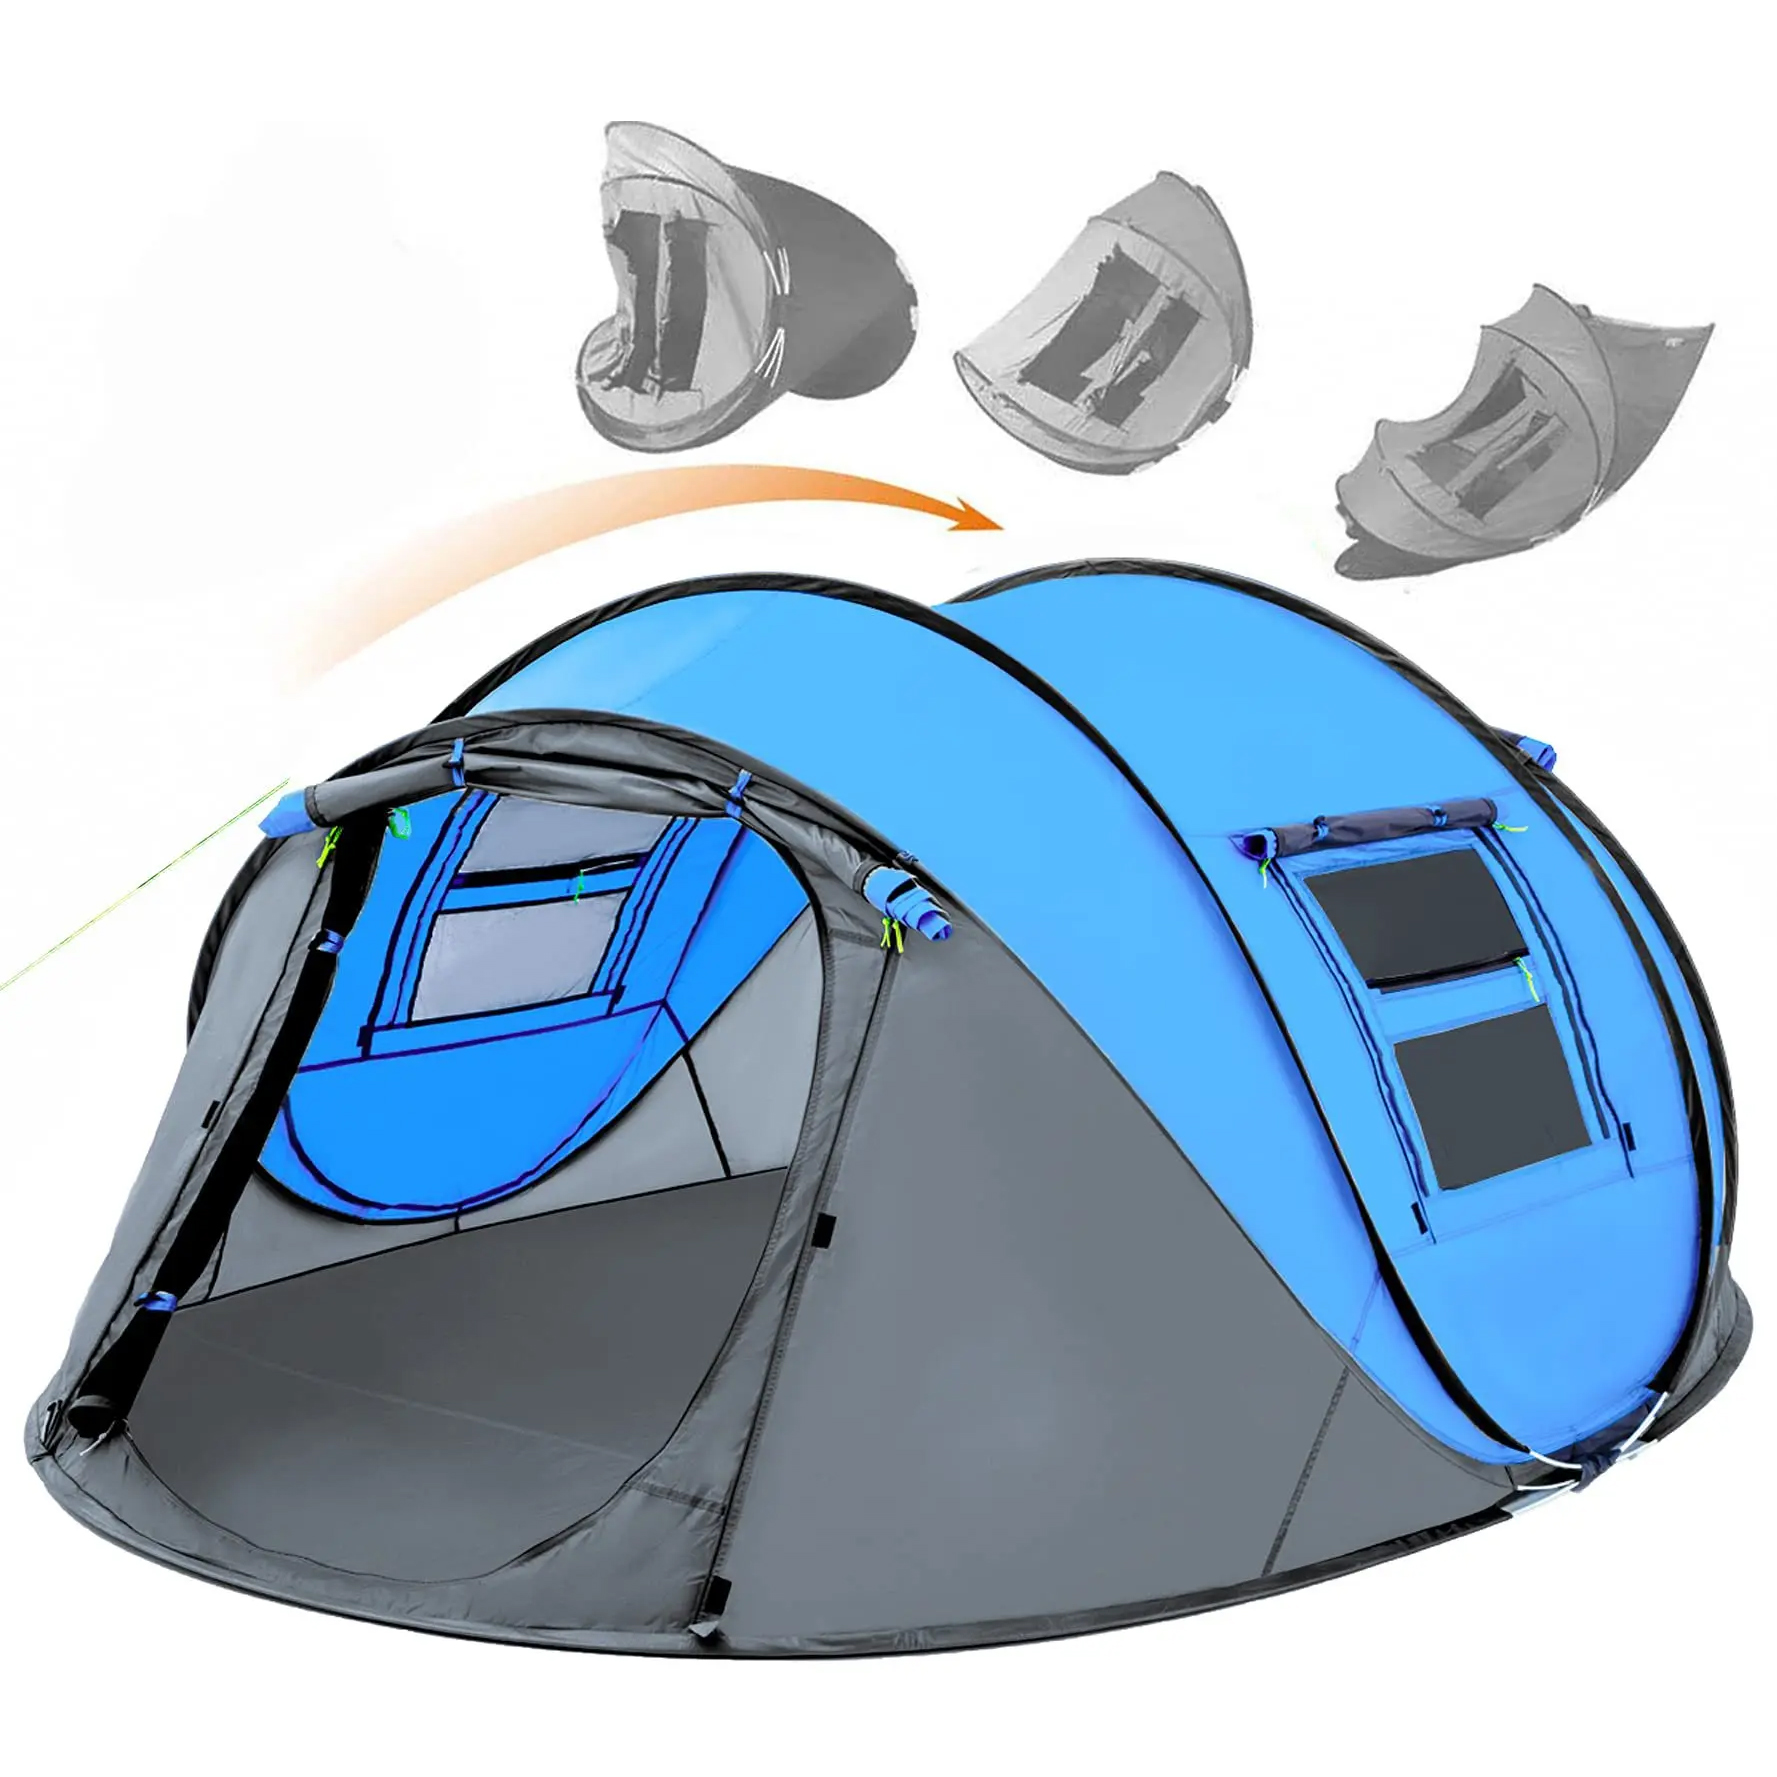 4 Person Easy Pop Up Tent Waterproof Automatic Setup 2 Doors-Instant Family Tents for Camping Hiking & Traveling Featured Image